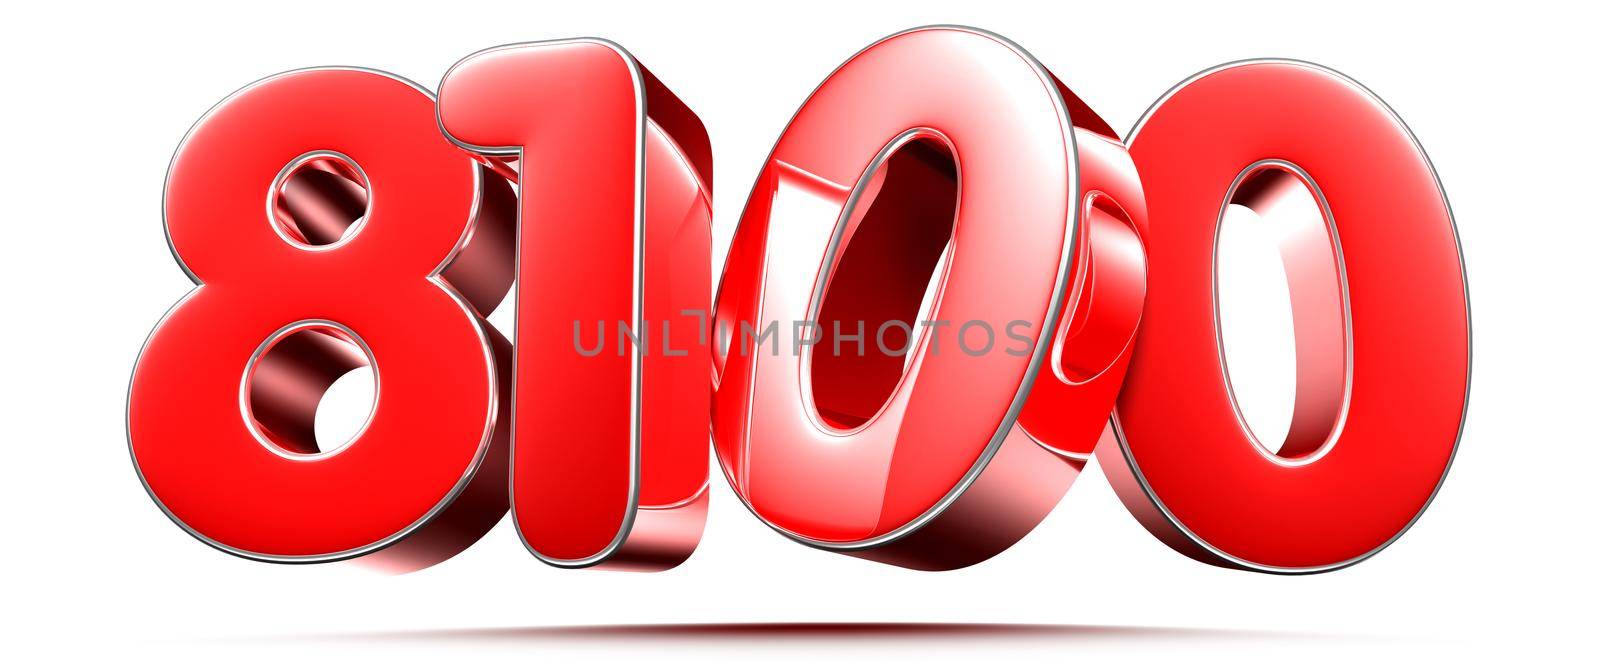 Rounded red numbers 8100 on white background 3D illustration with clipping path